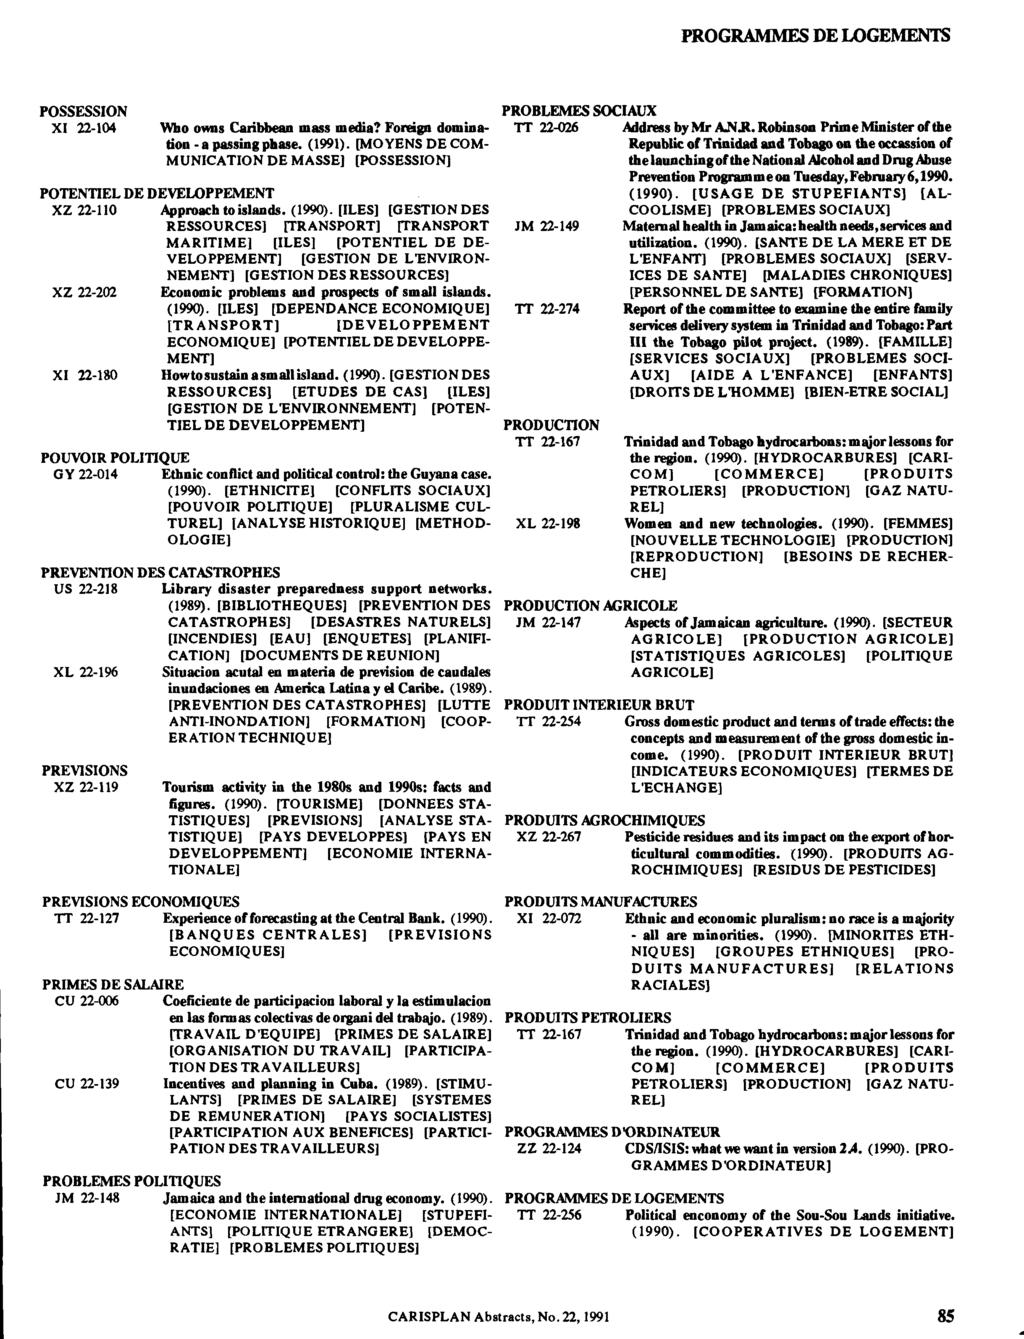 PROGRAMMES DE LOGEMENTS POSSESSION XI 22-104 Who owns Caribbean mass media? Foreign domination - a passing phase. (1991).